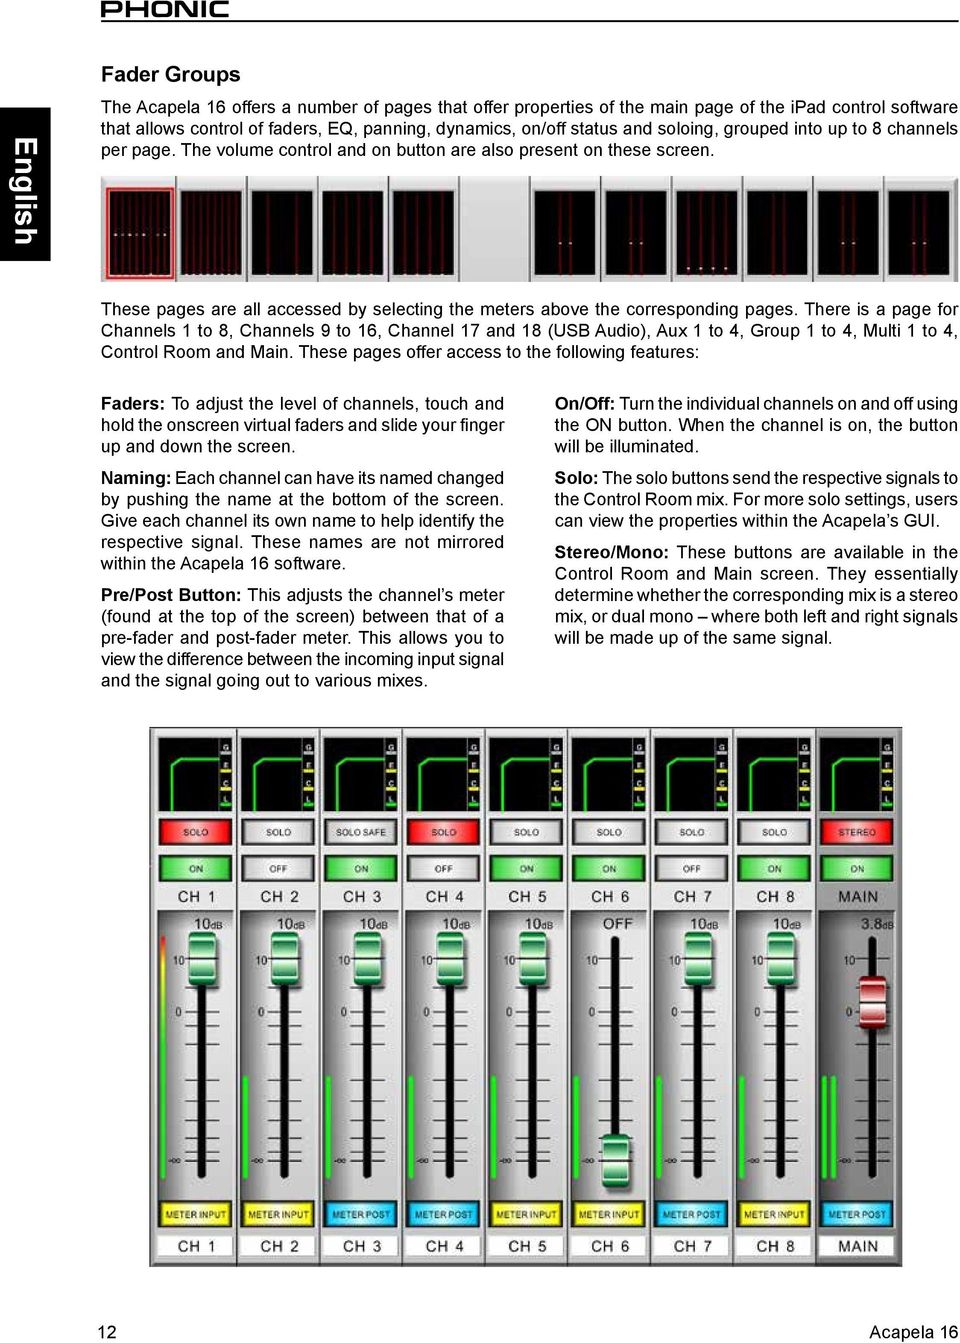 There is a page for Channels 1 to 8, Channels 9 to 16, Channel 17 and 18 (USB Audio), Aux 1 to 4, Group 1 to 4, Multi 1 to 4, Control Room and Main.